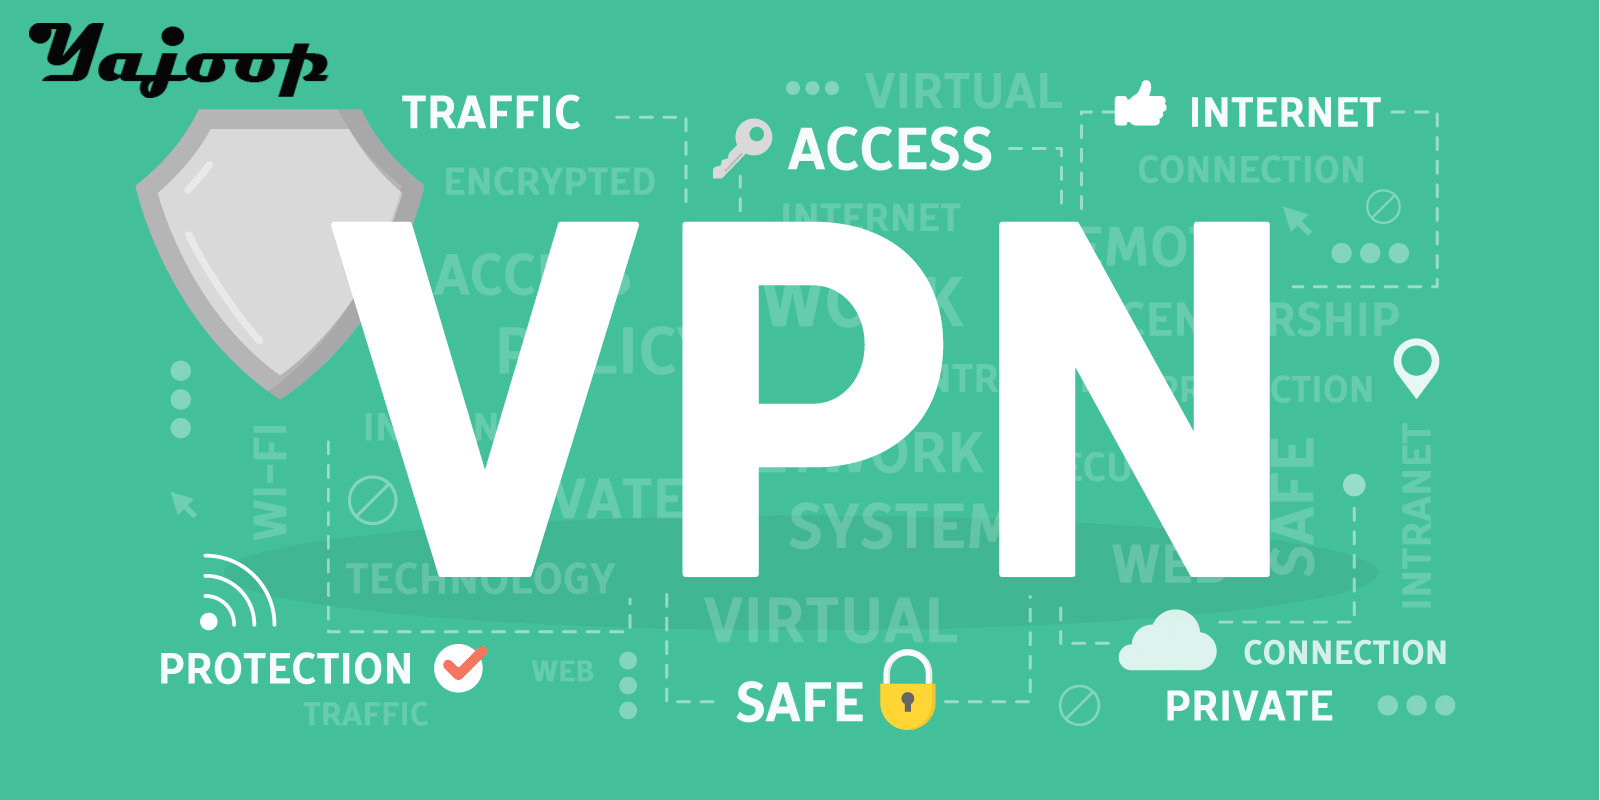 What Is VPN? How to use VPN on Mobile or PC? - Yajoop